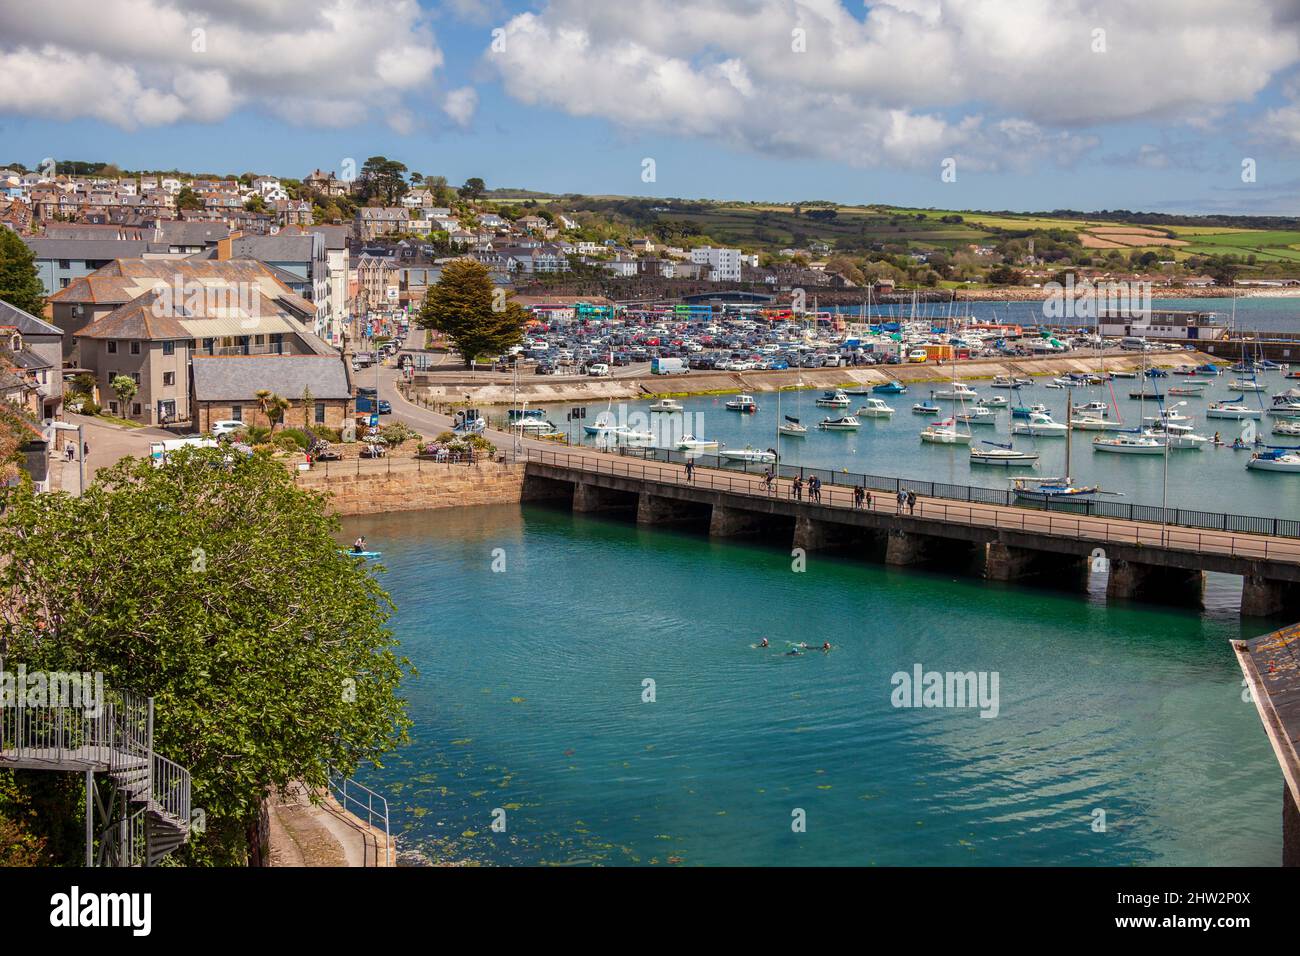 Abbey Basin, the old harbour and historic area of Penzance. Tall ships once offloaded cargo from Europe and the Caribbean here Stock Photo